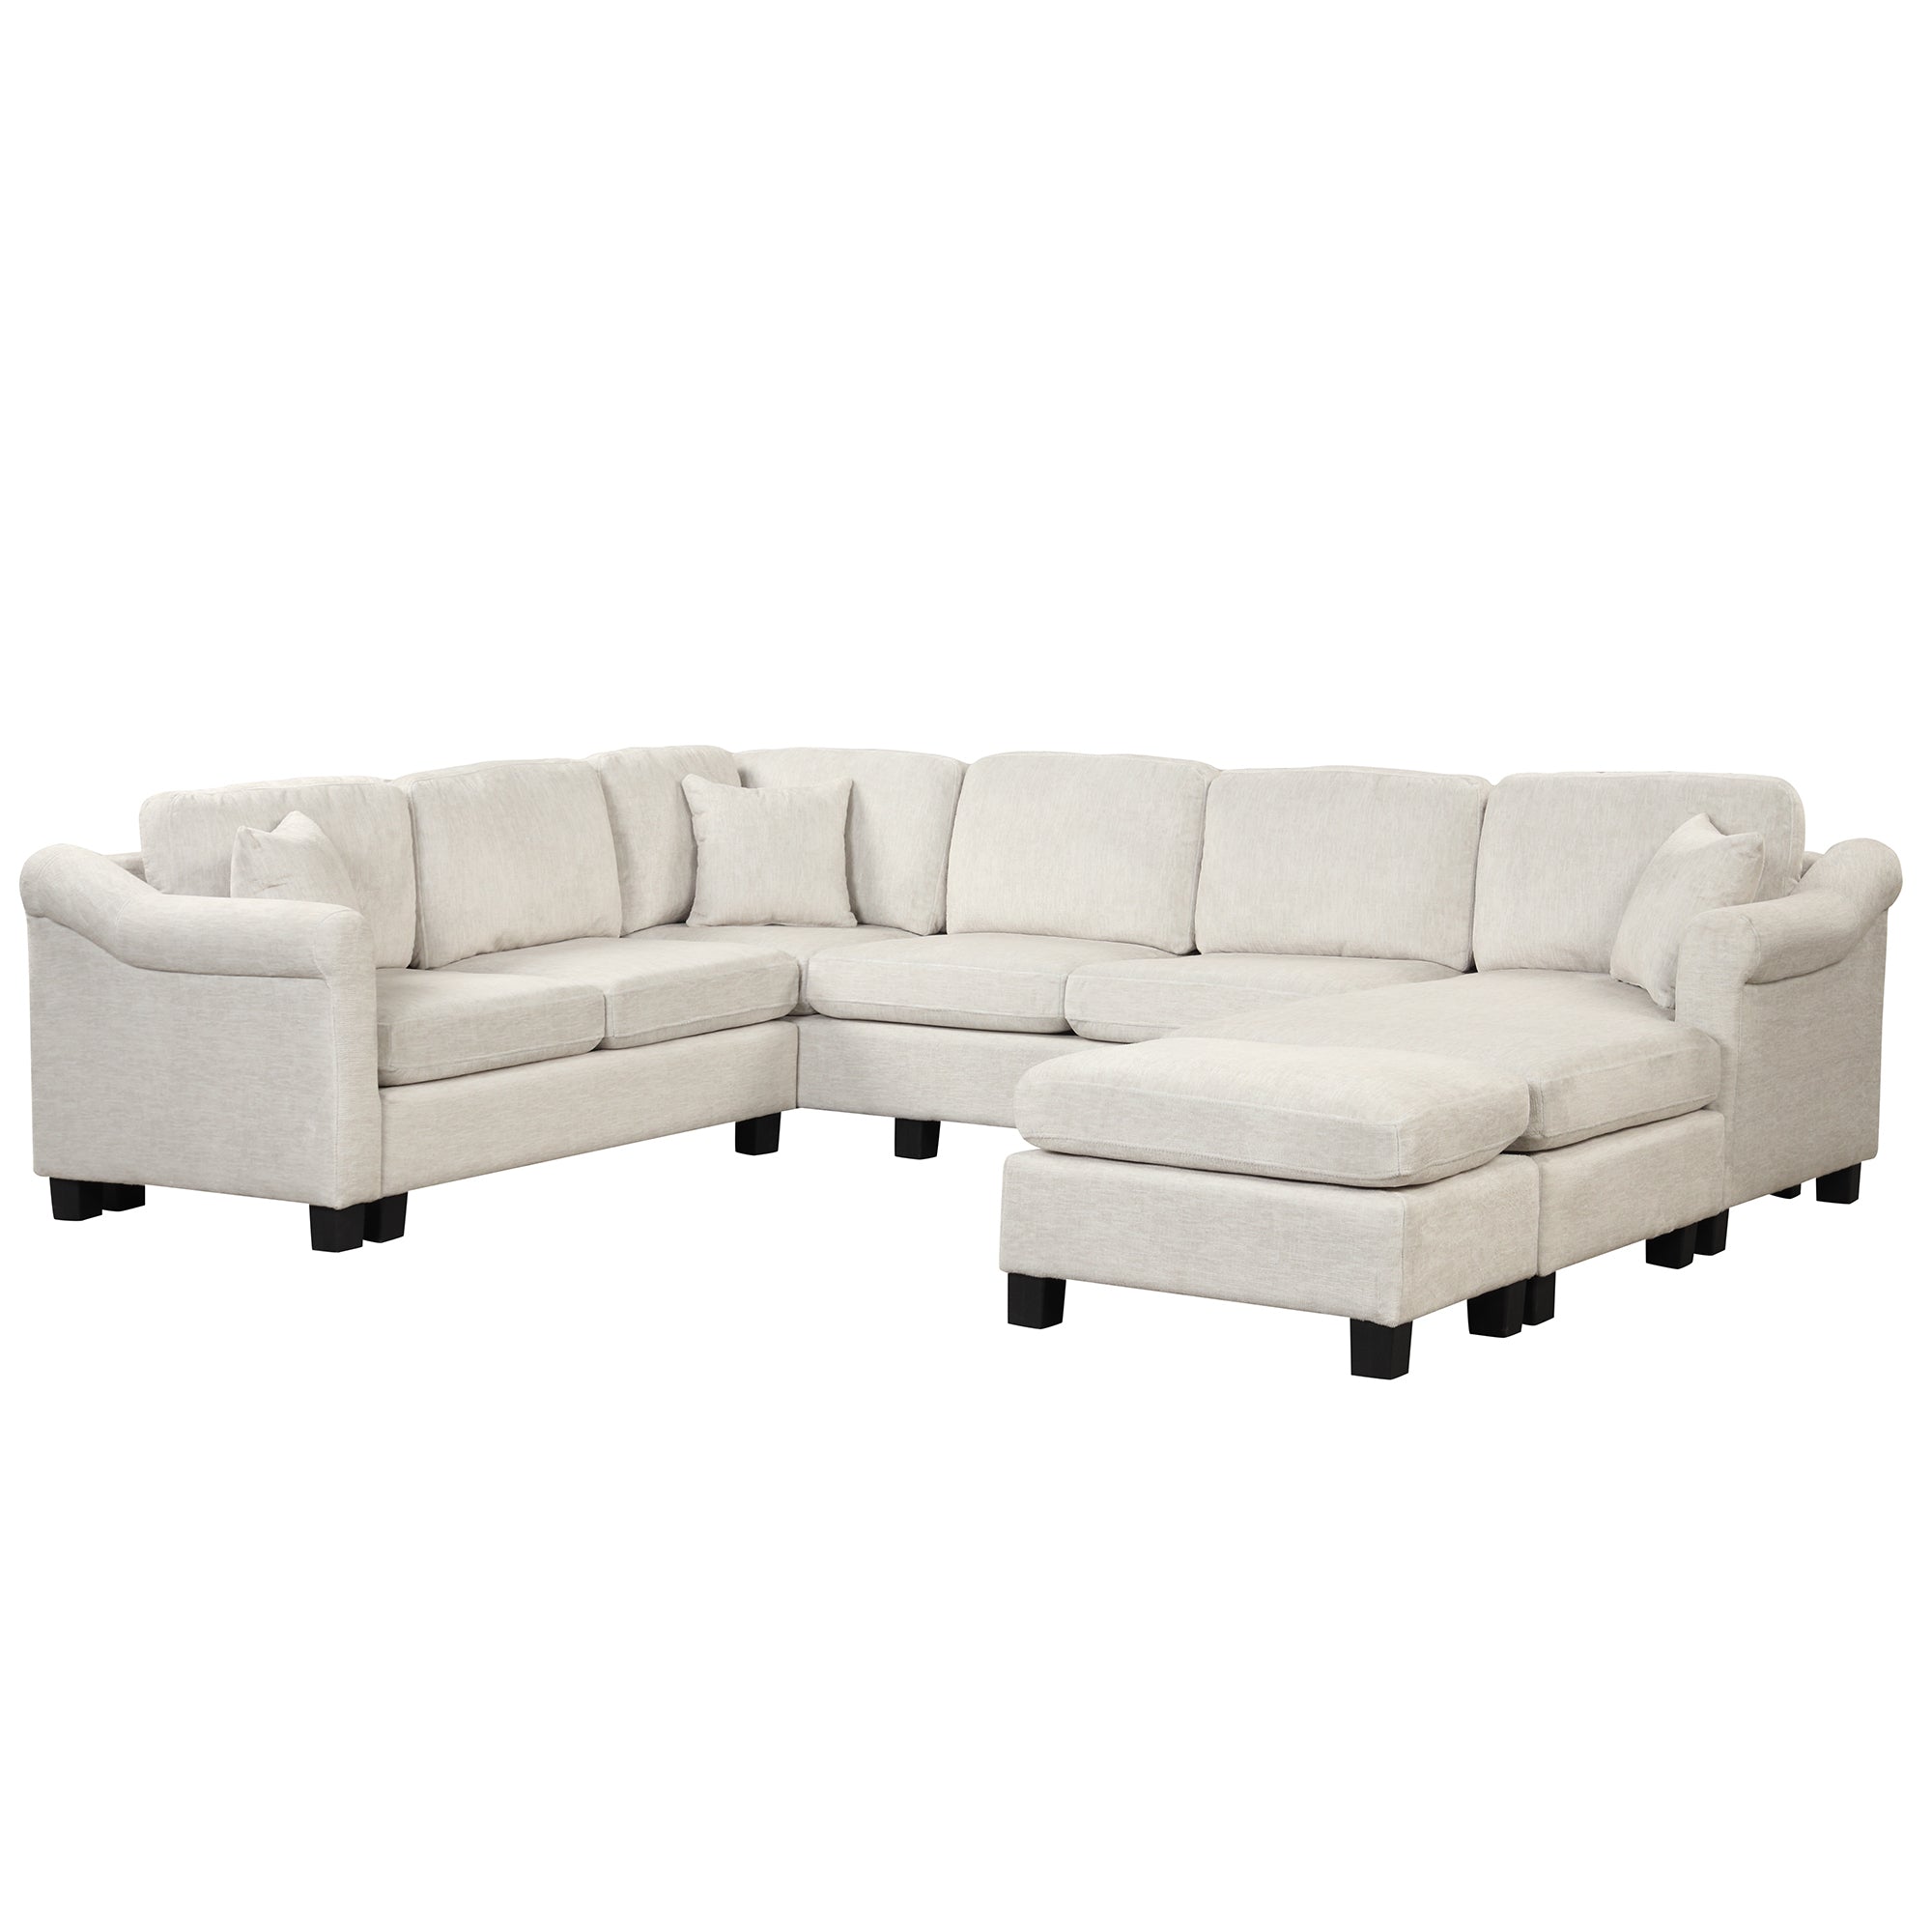 White Large Velvet U Shaped Sectional Sofa w/ Ottoman & Chaise-Stationary Sectionals-American Furniture Outlet